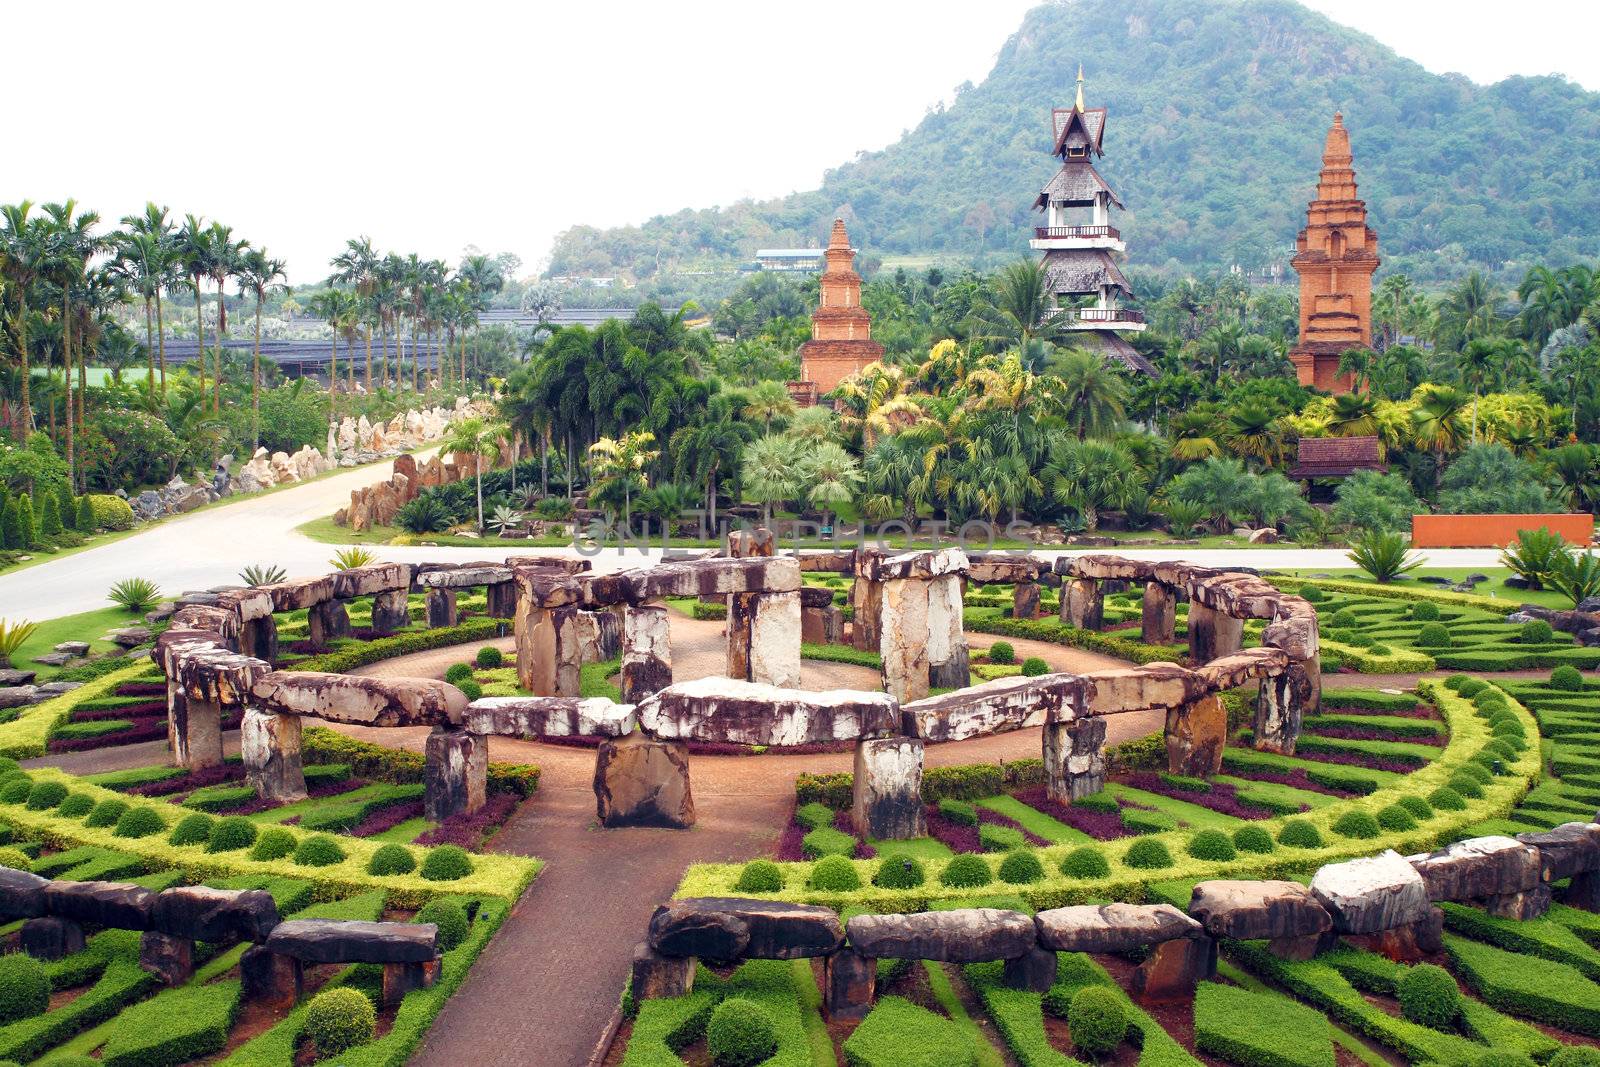 Park nong nooch in Thailand, shrubberies grow in geometric figures